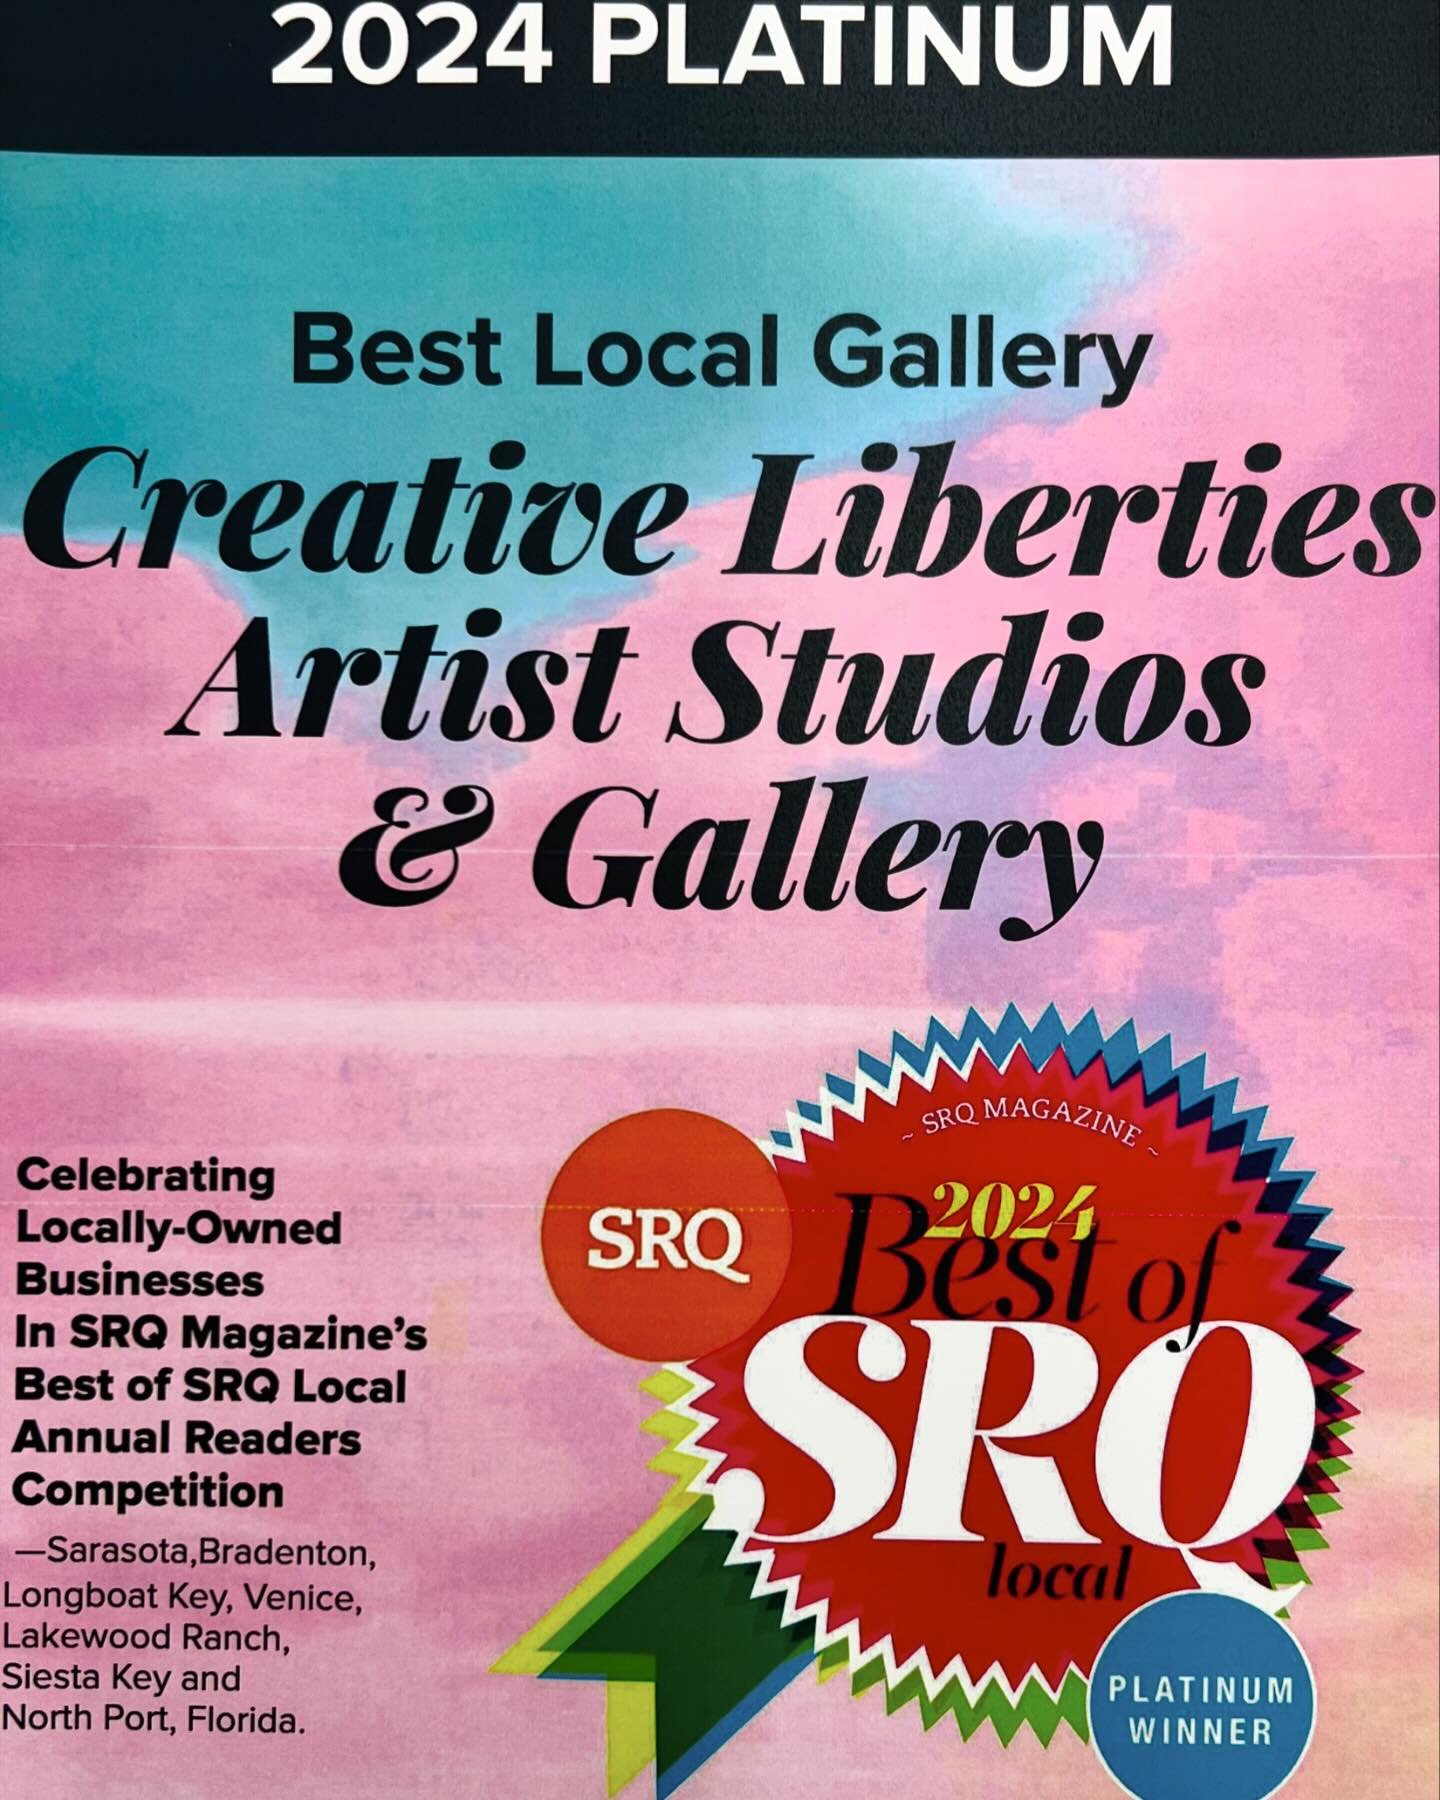 Woot!! Thank you Sarasota!  Two years platinum in a row! ❤️❤️ and thank you to everyone at SRQ Magazine for being so supportive. Love Live Local